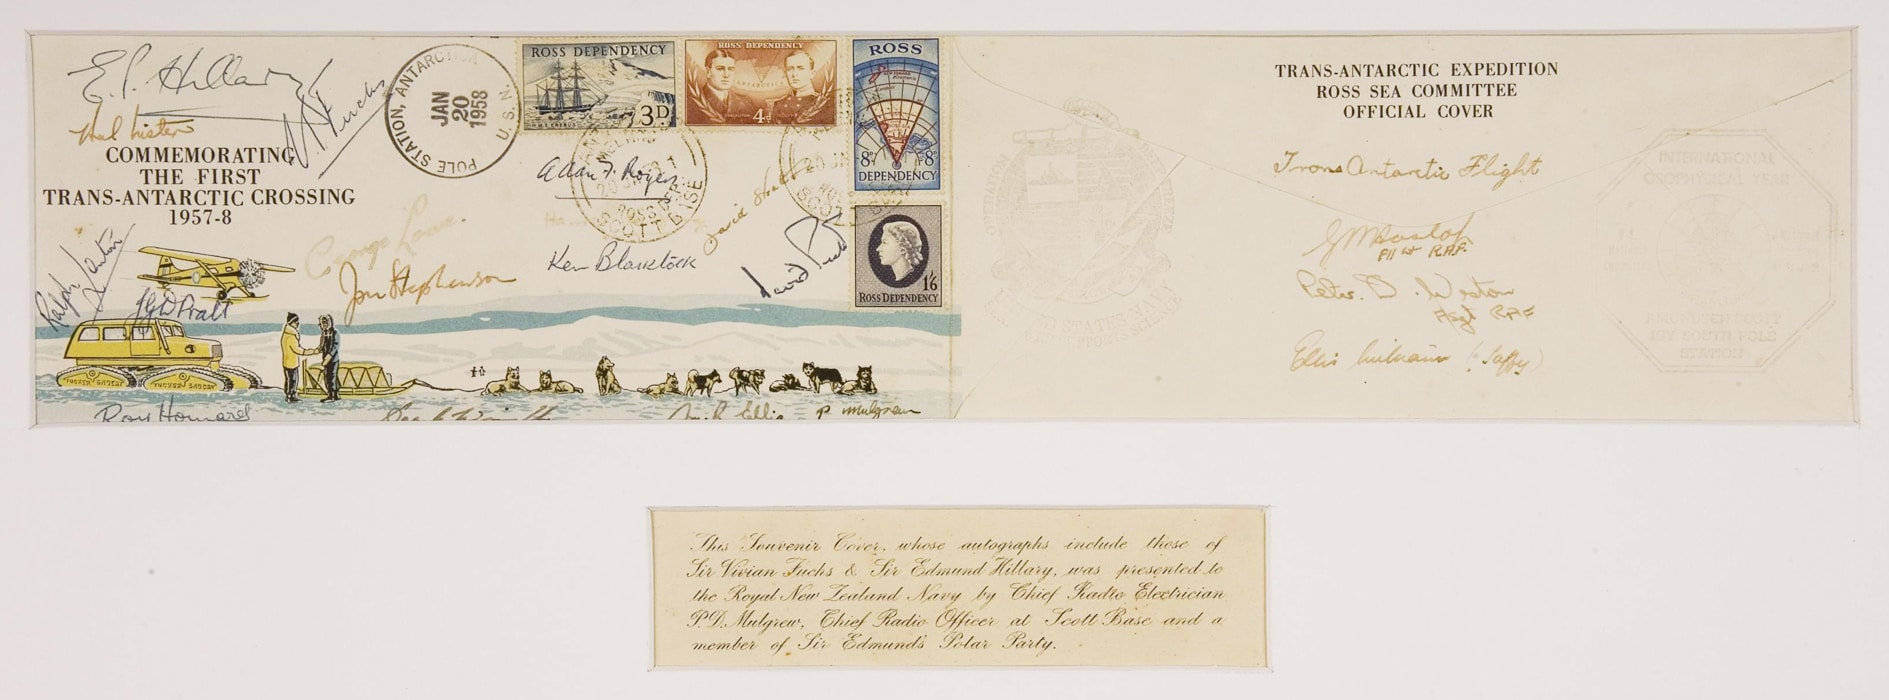 Framed first day cover commemorating the Trans-Antarctic crossing, 1958. Signed by Sir Vivien Fuchs and Sir Edmund Hilary